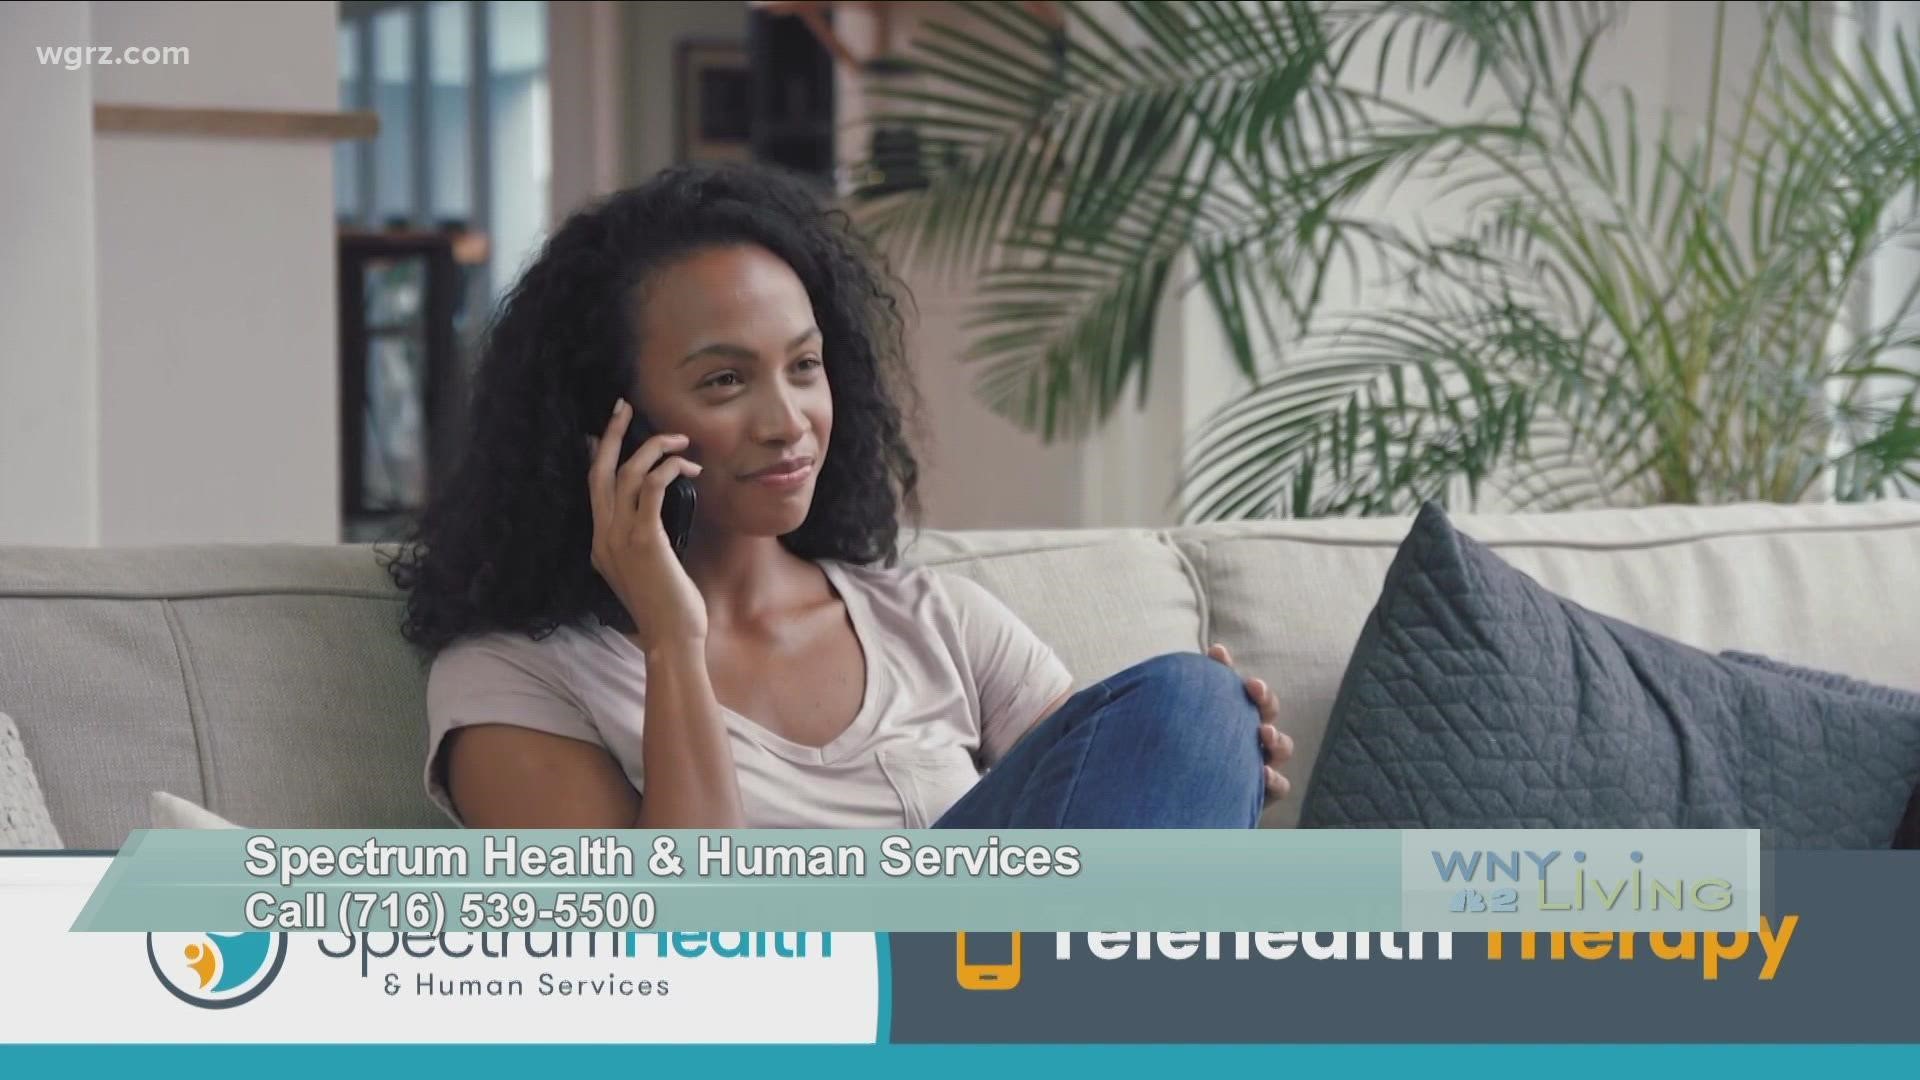 WNY Living - October 23 - Spectrum Health & Human Services (THIS VIDEO IS SPONSORED BY SPECTRUM HEALTH & HUMAN SERVICES)